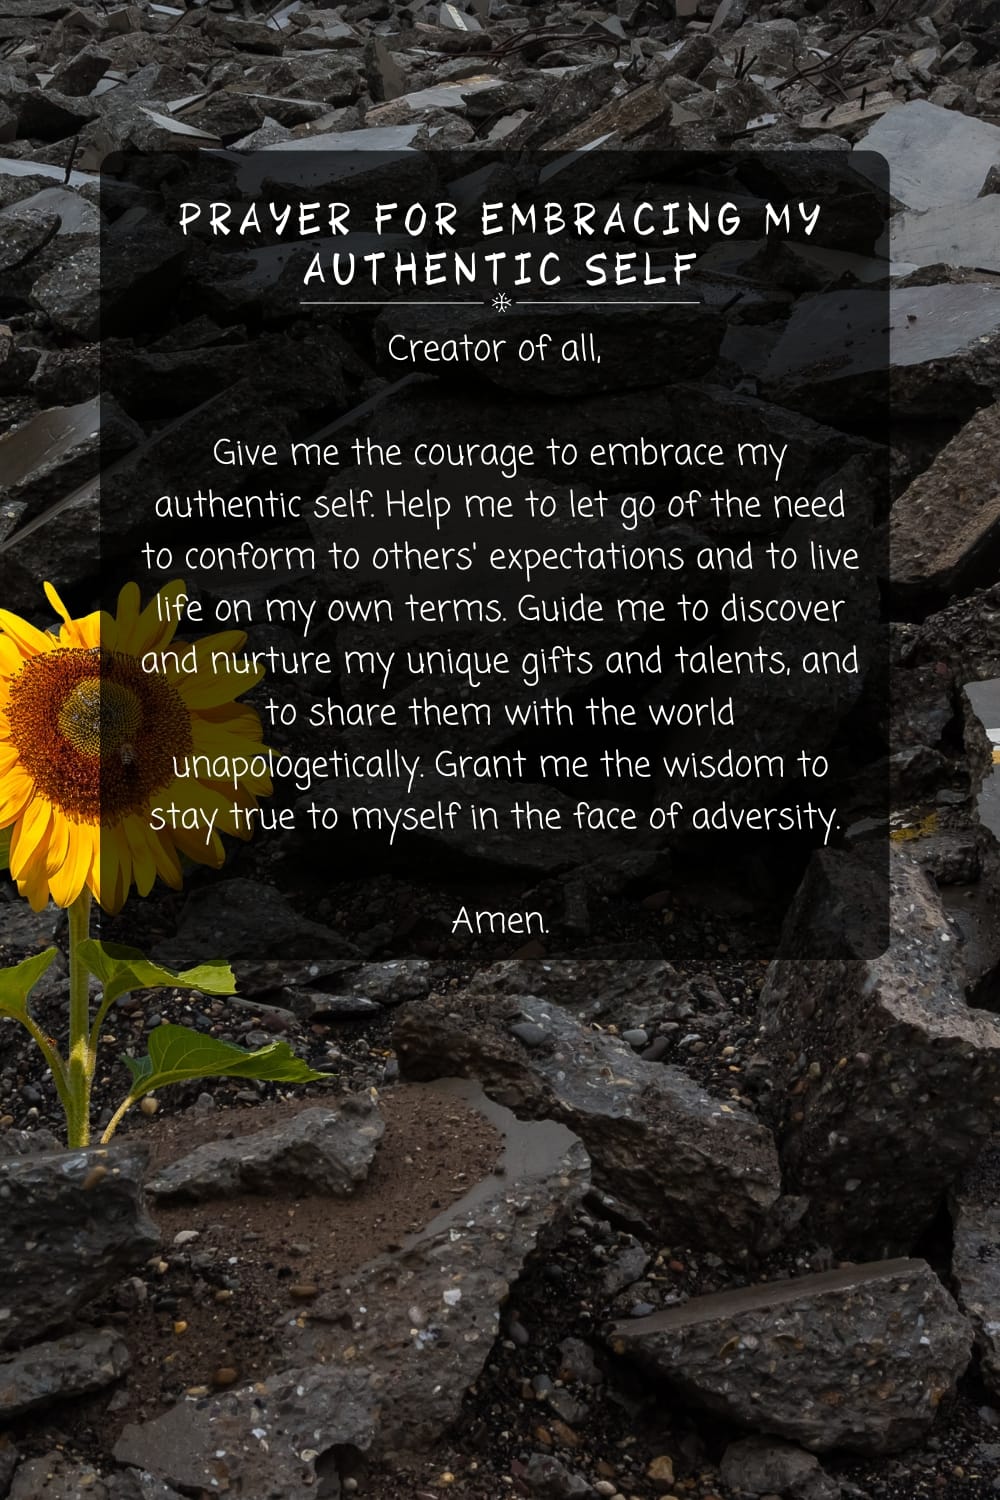 Prayer for Embracing My Authentic Self